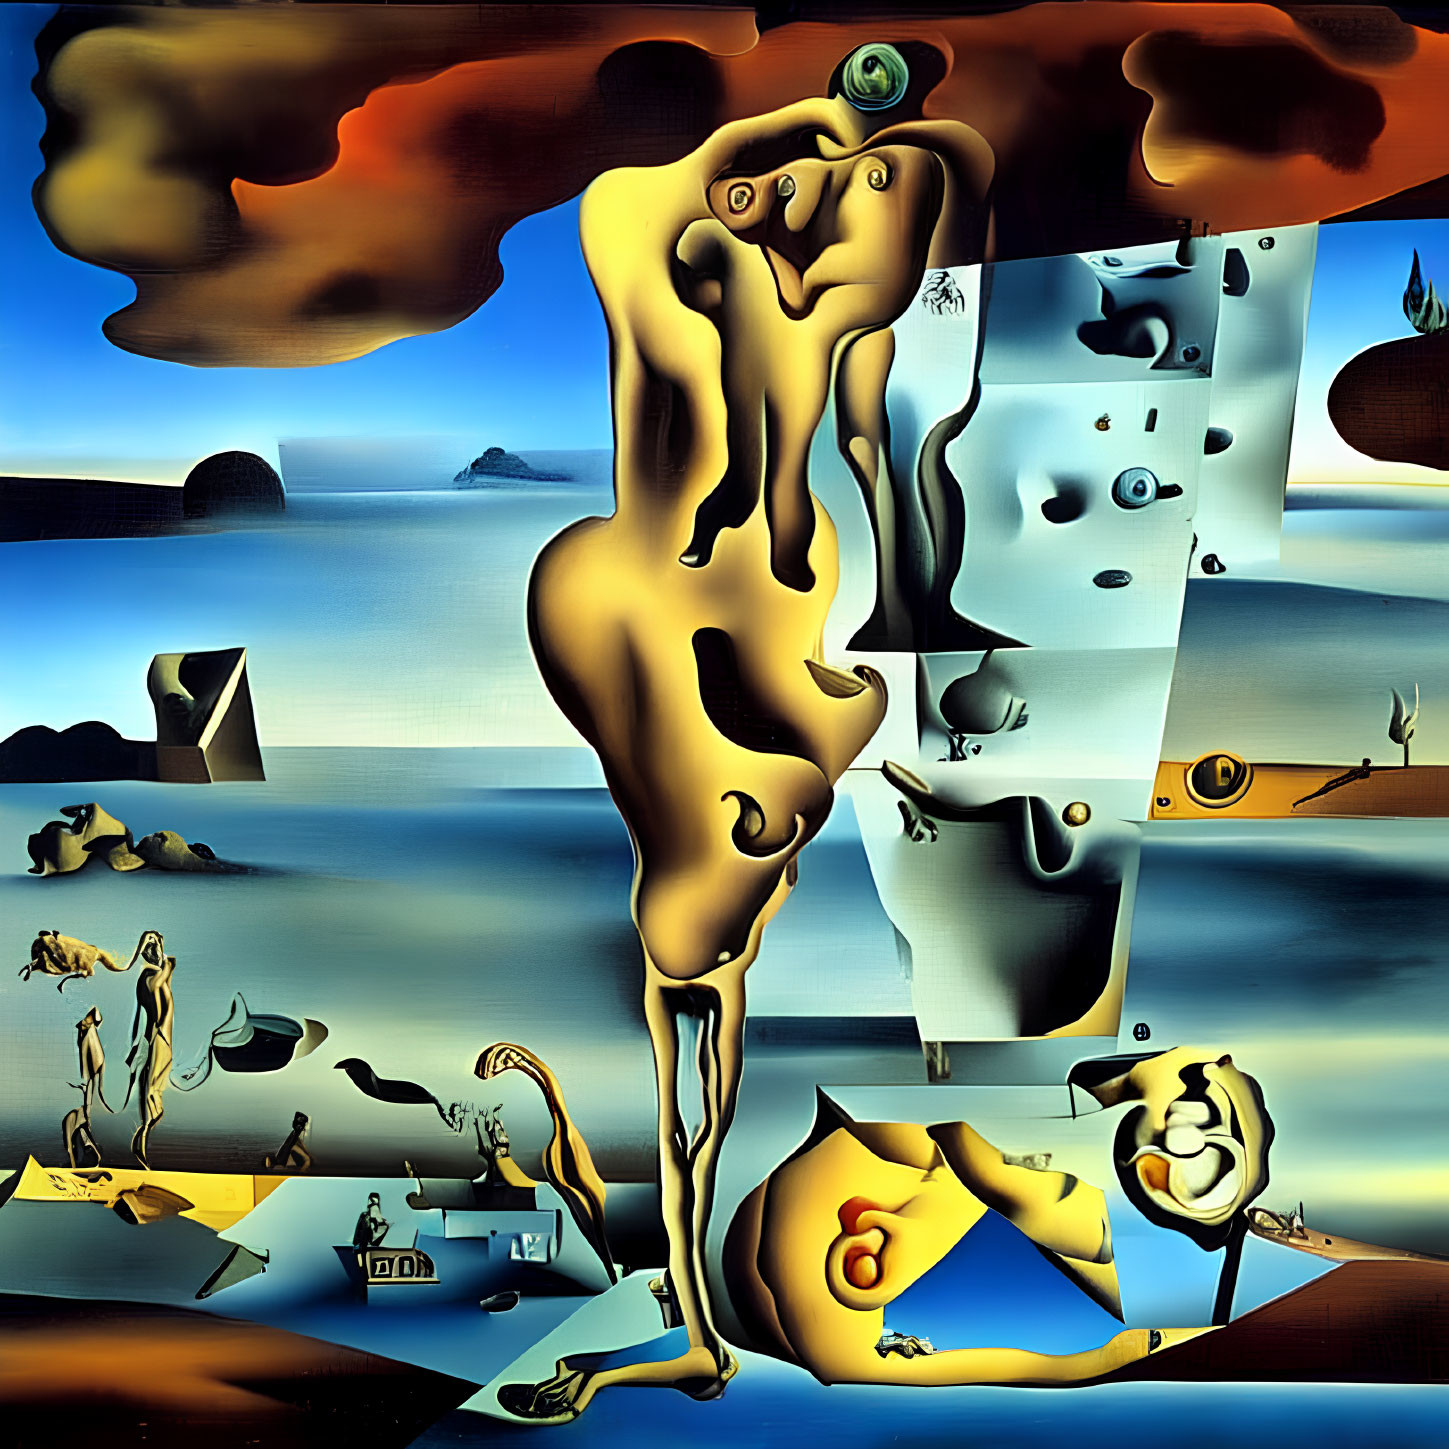 Surrealistic painting of melting clocks and distorted figures in desolate landscape